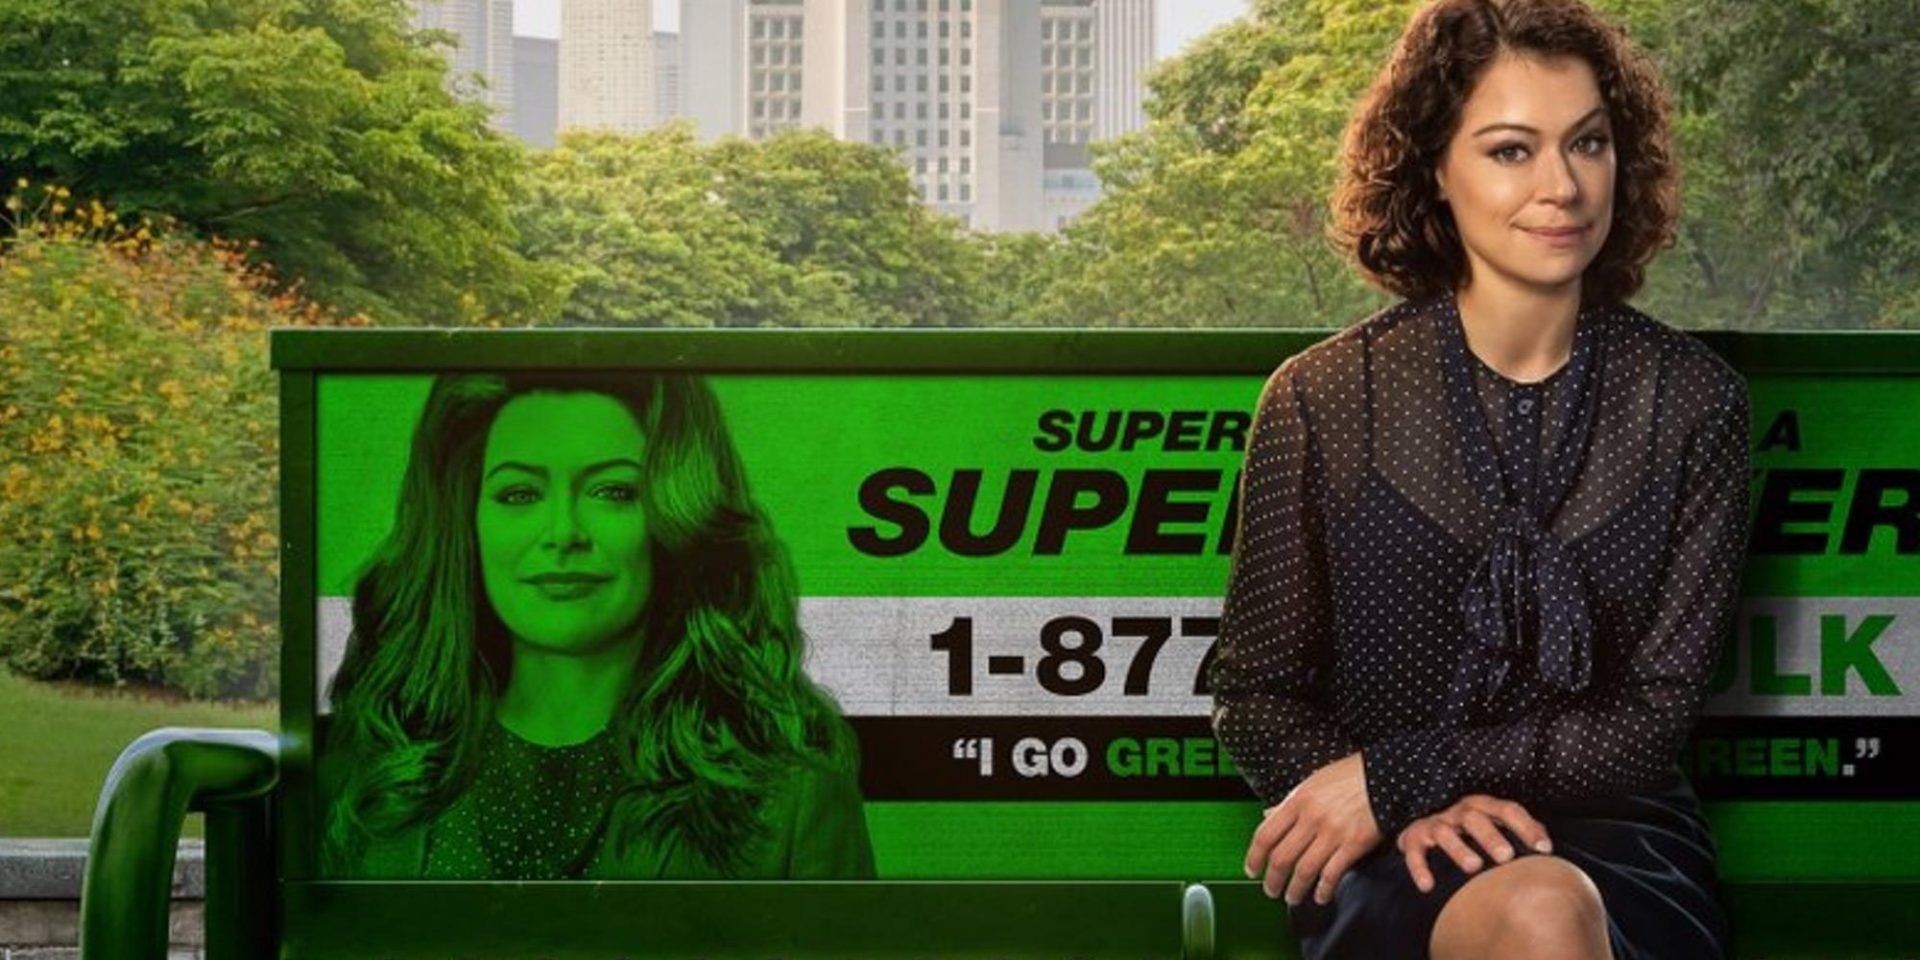 She-Hulk episode 2 release date and time